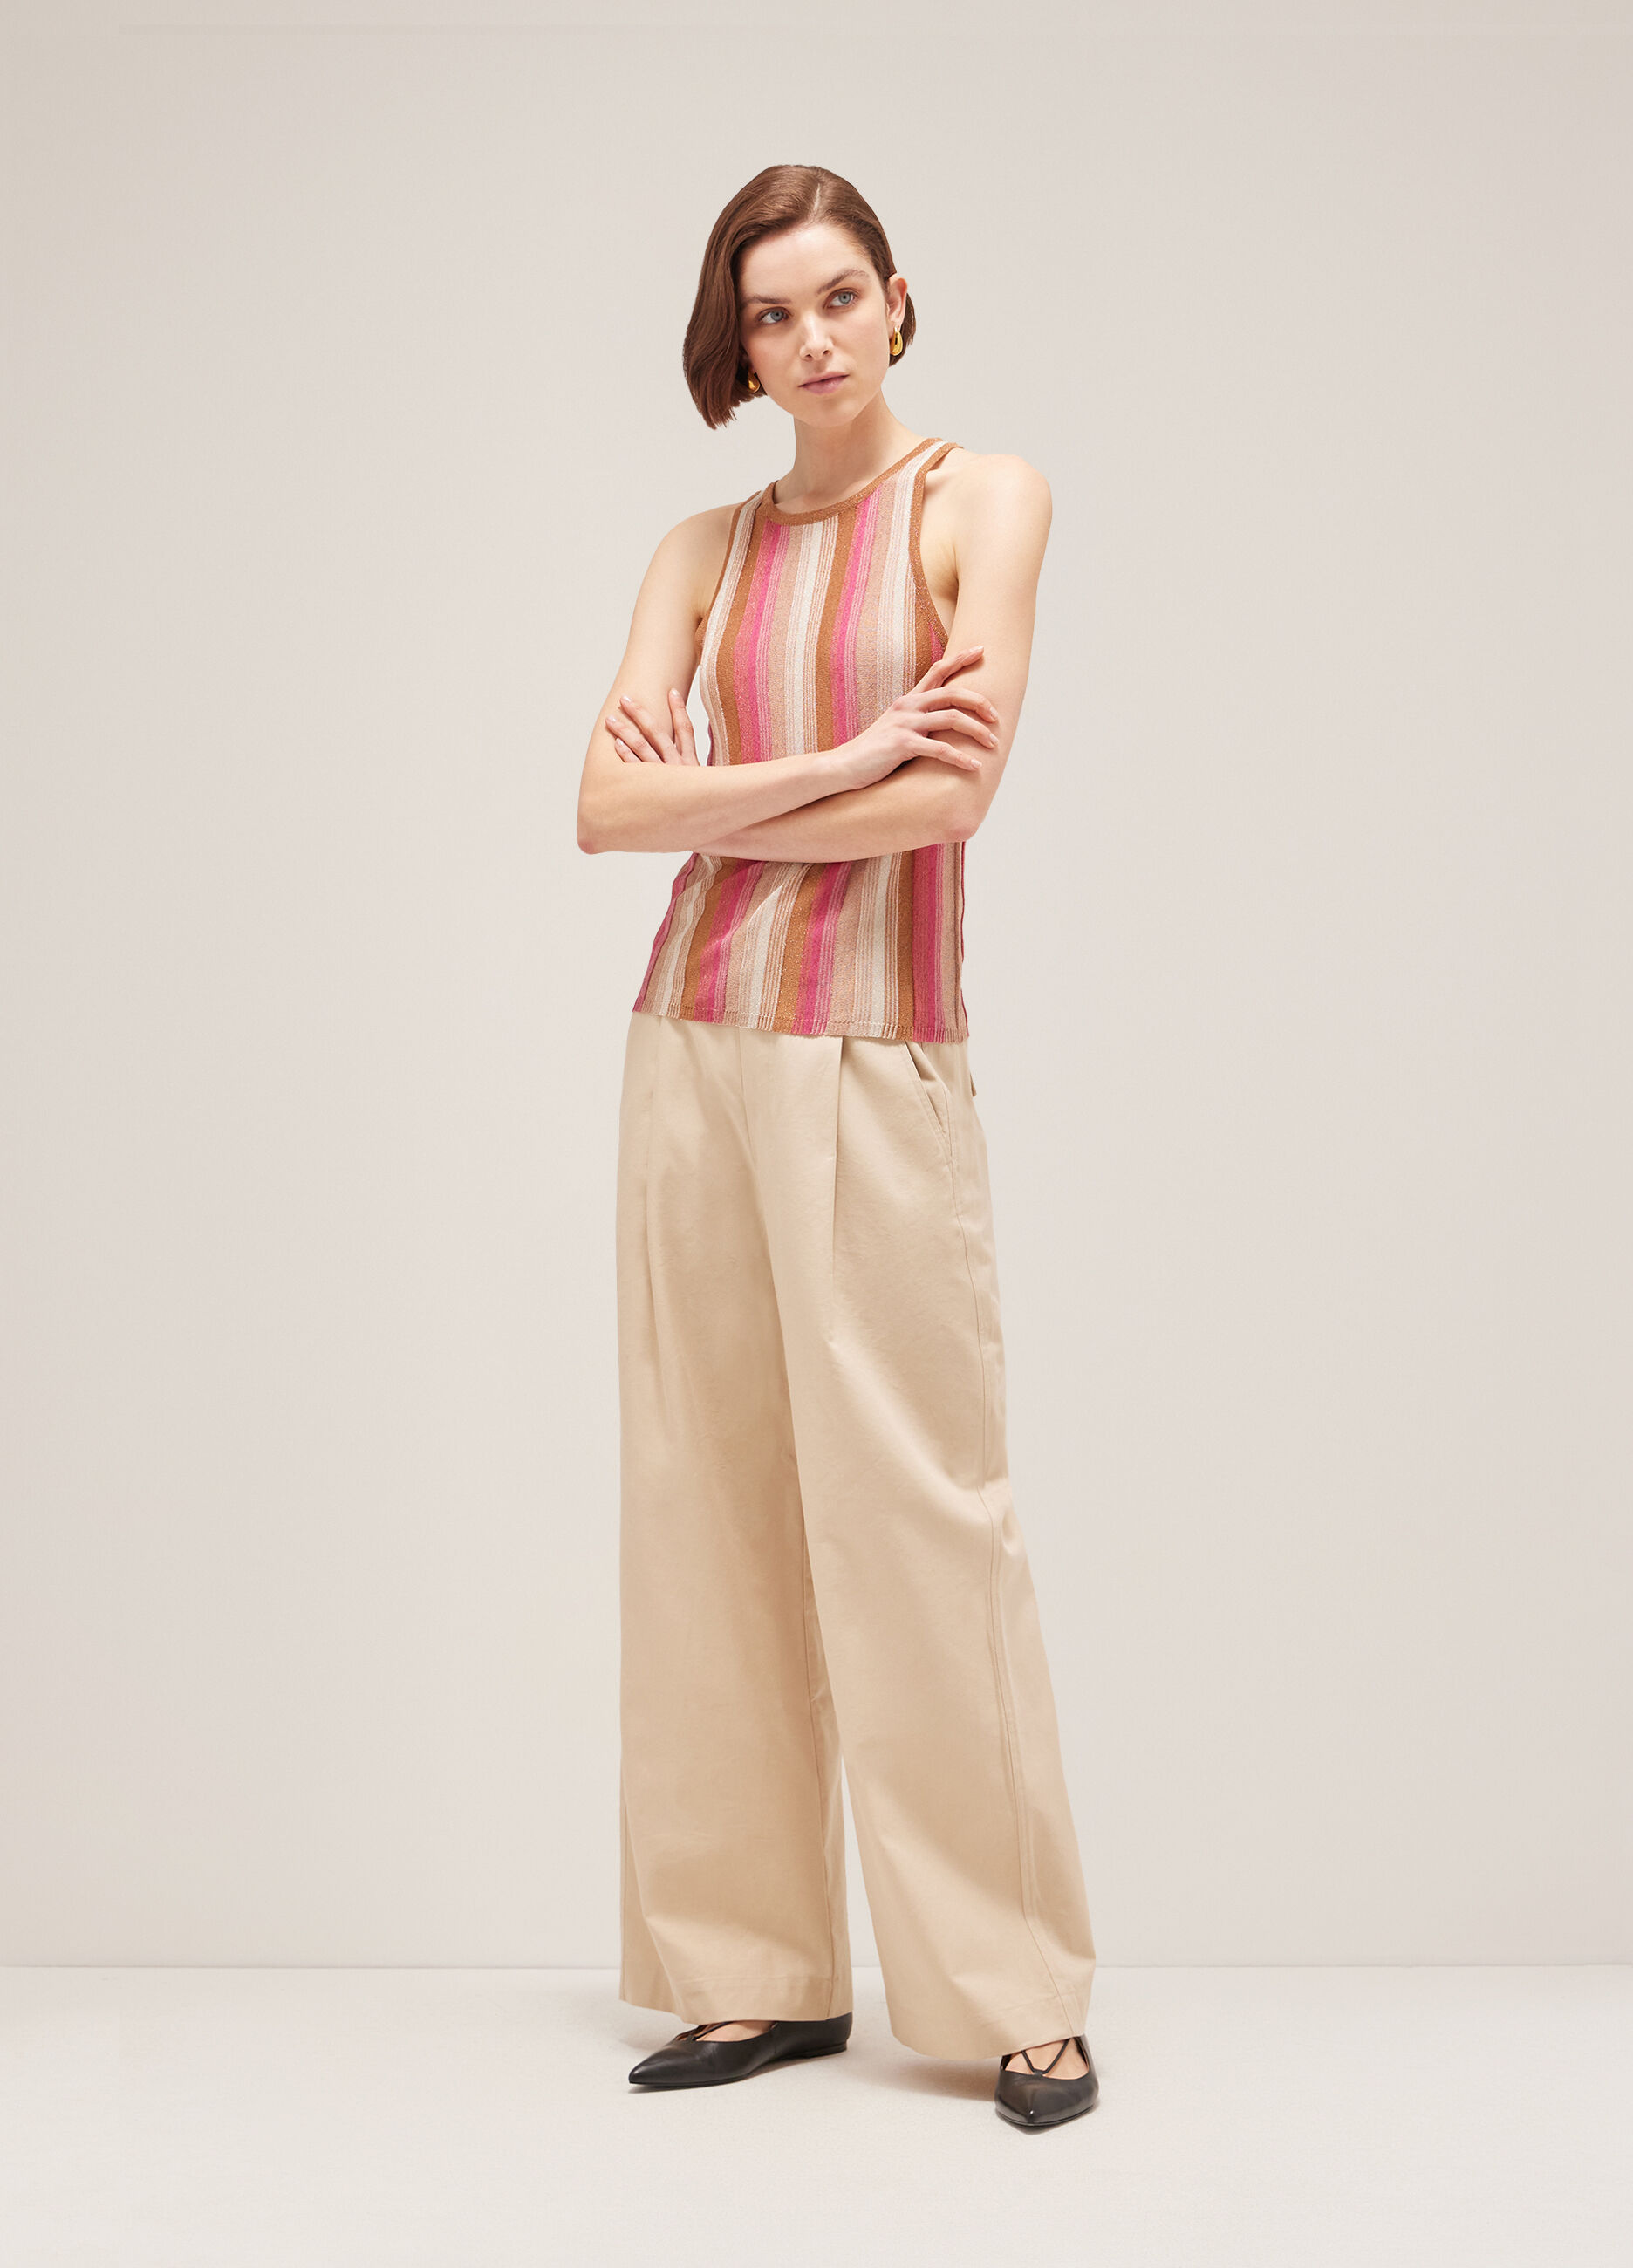 Pink and brown striped sleeveless top_0